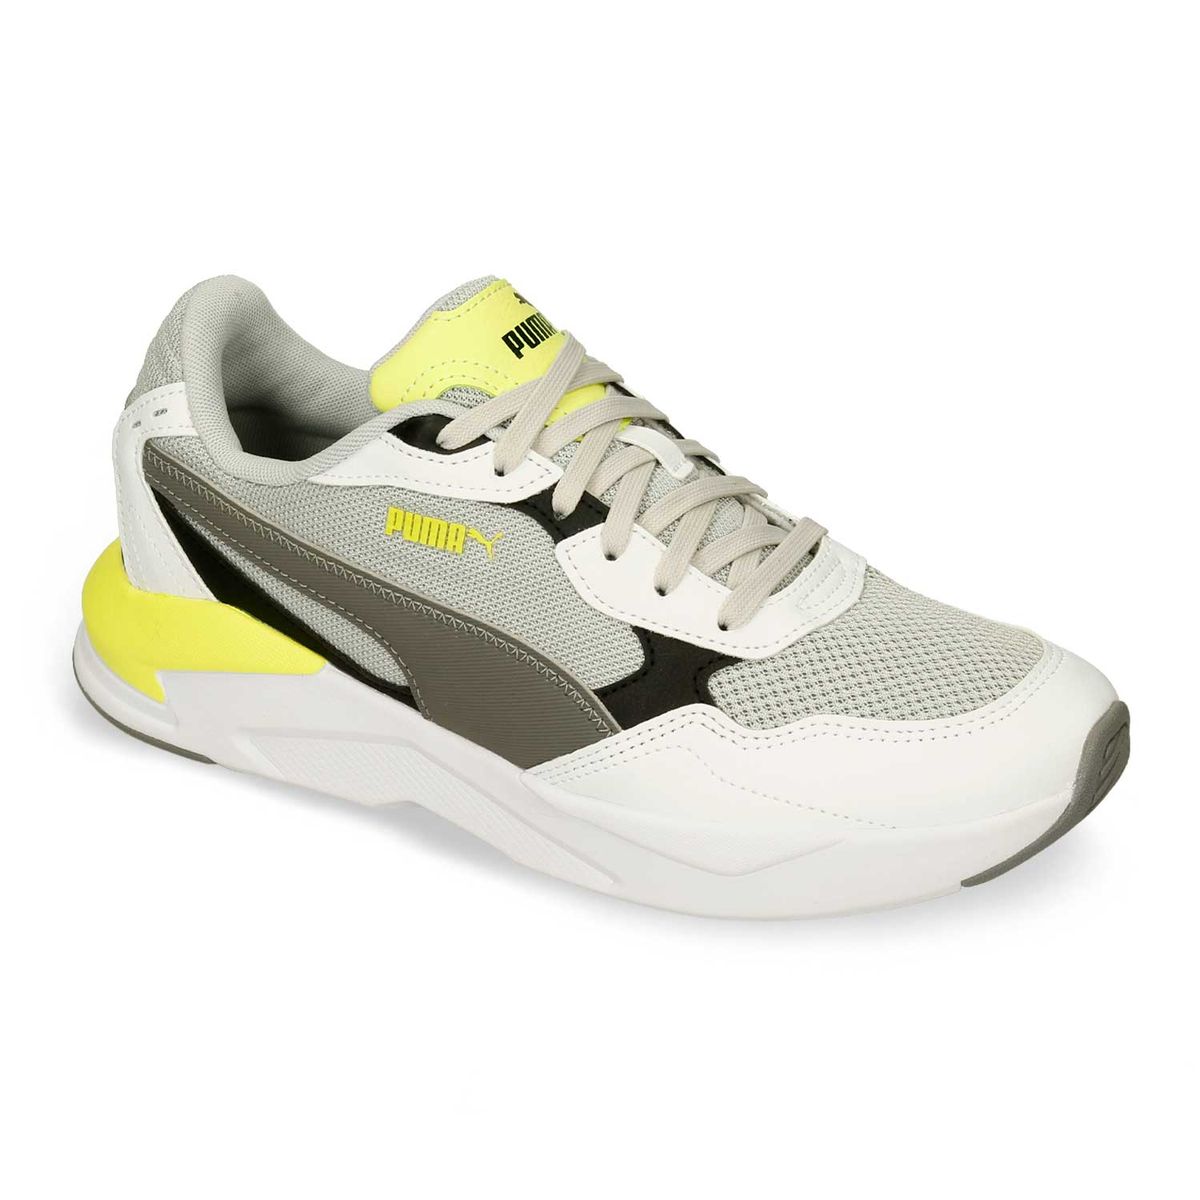 Tenis Casuales Gris-Blanco Puma X-Ray Speed Lite Hombre